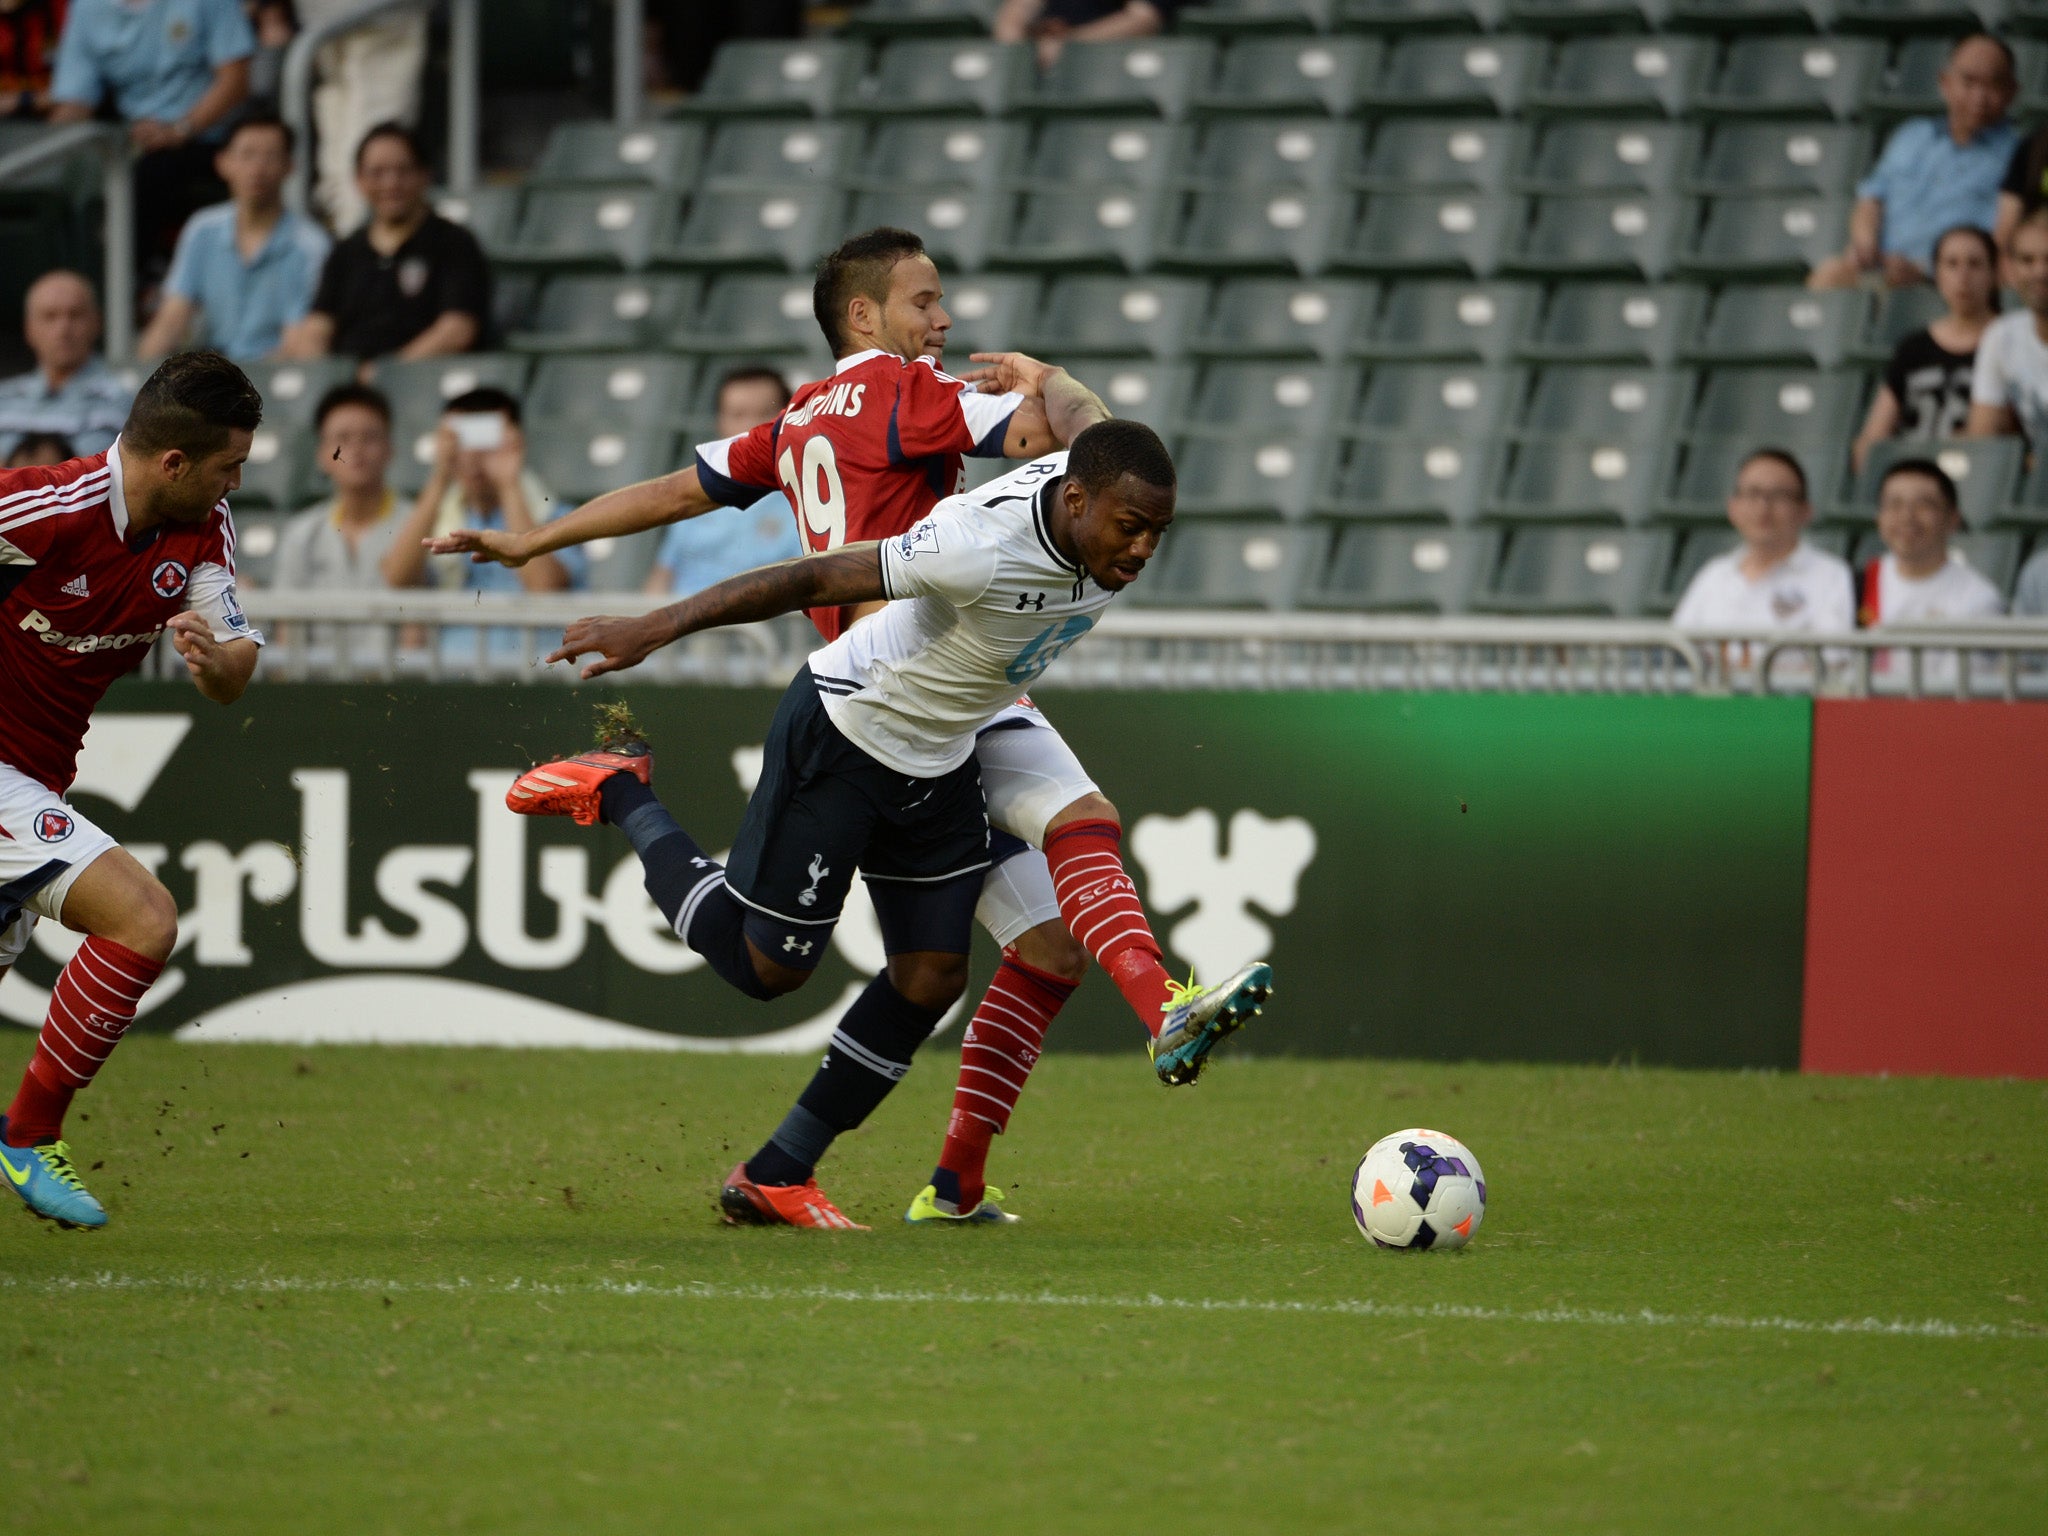 Tottenham Hotspur's Daniel Rose competes South China's Dhiego De Souza Martins during their Barclays Asia trophy third place match